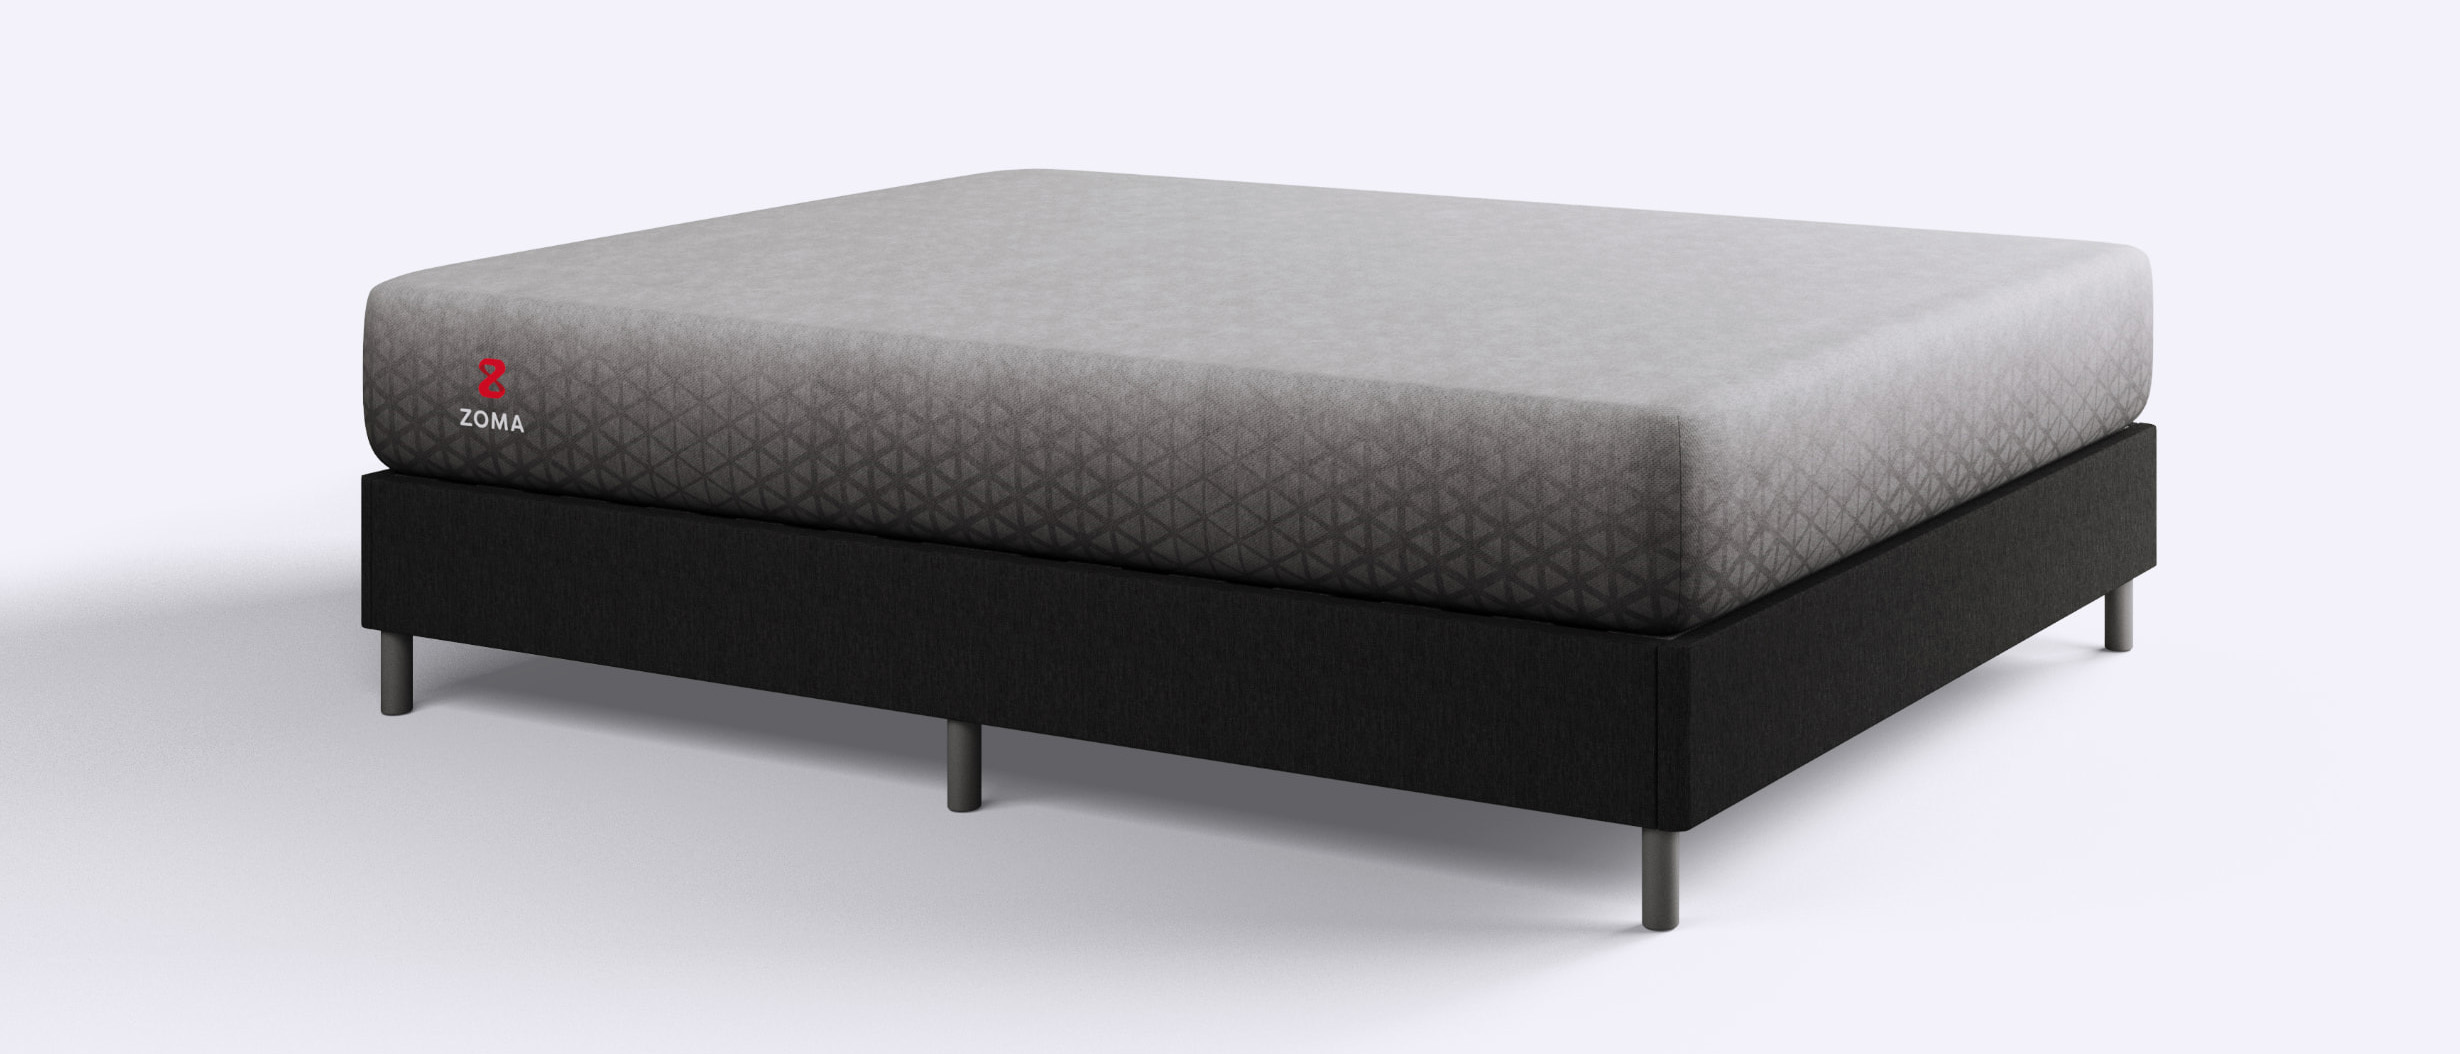 Review image shows the Zoma Memory Foam Mattress on a black box spring